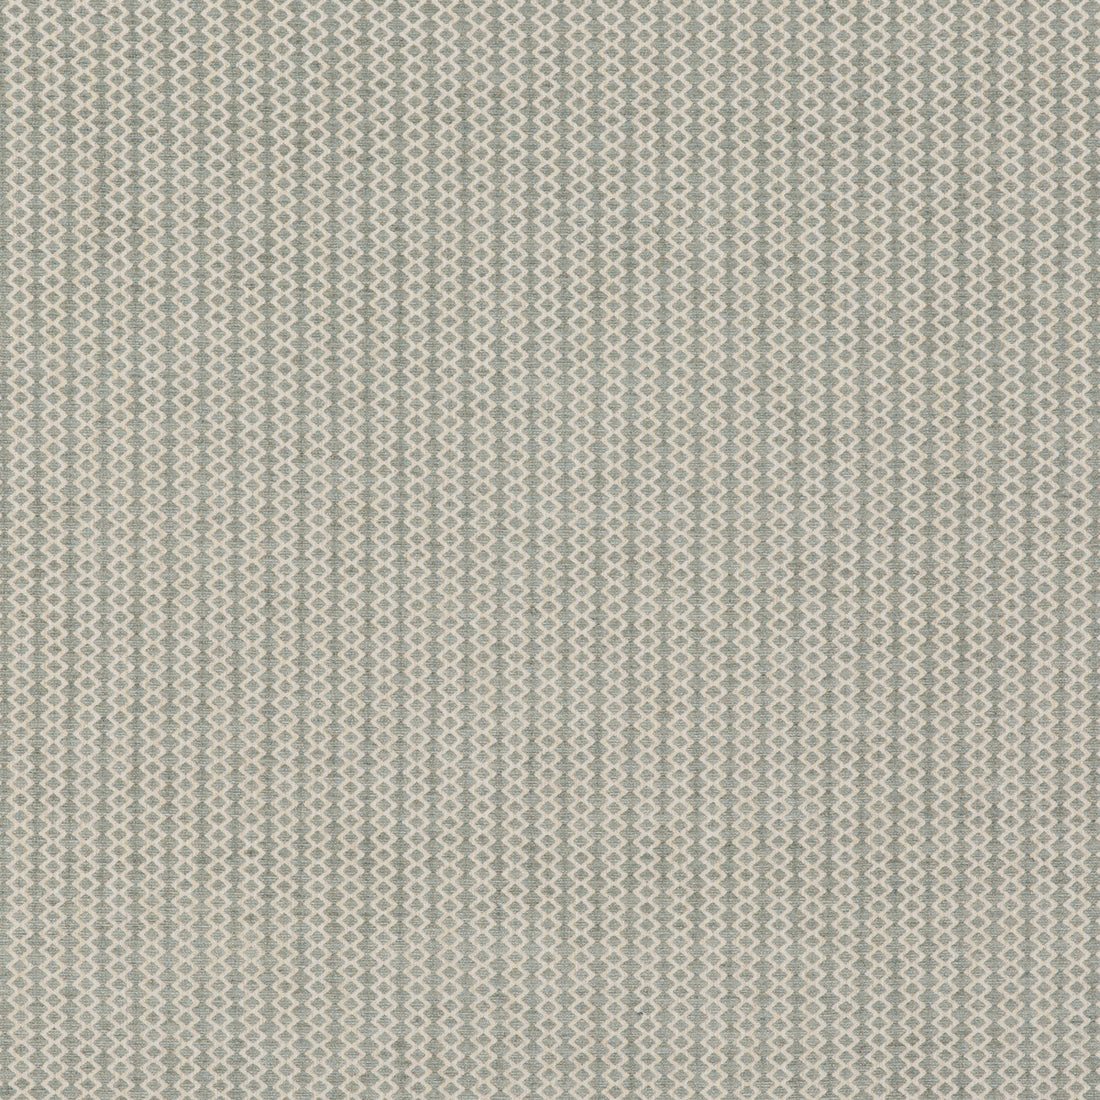 Harwood fabric in aqua color - pattern BF10958.725.0 - by G P &amp; J Baker in the Baker House Textures collection